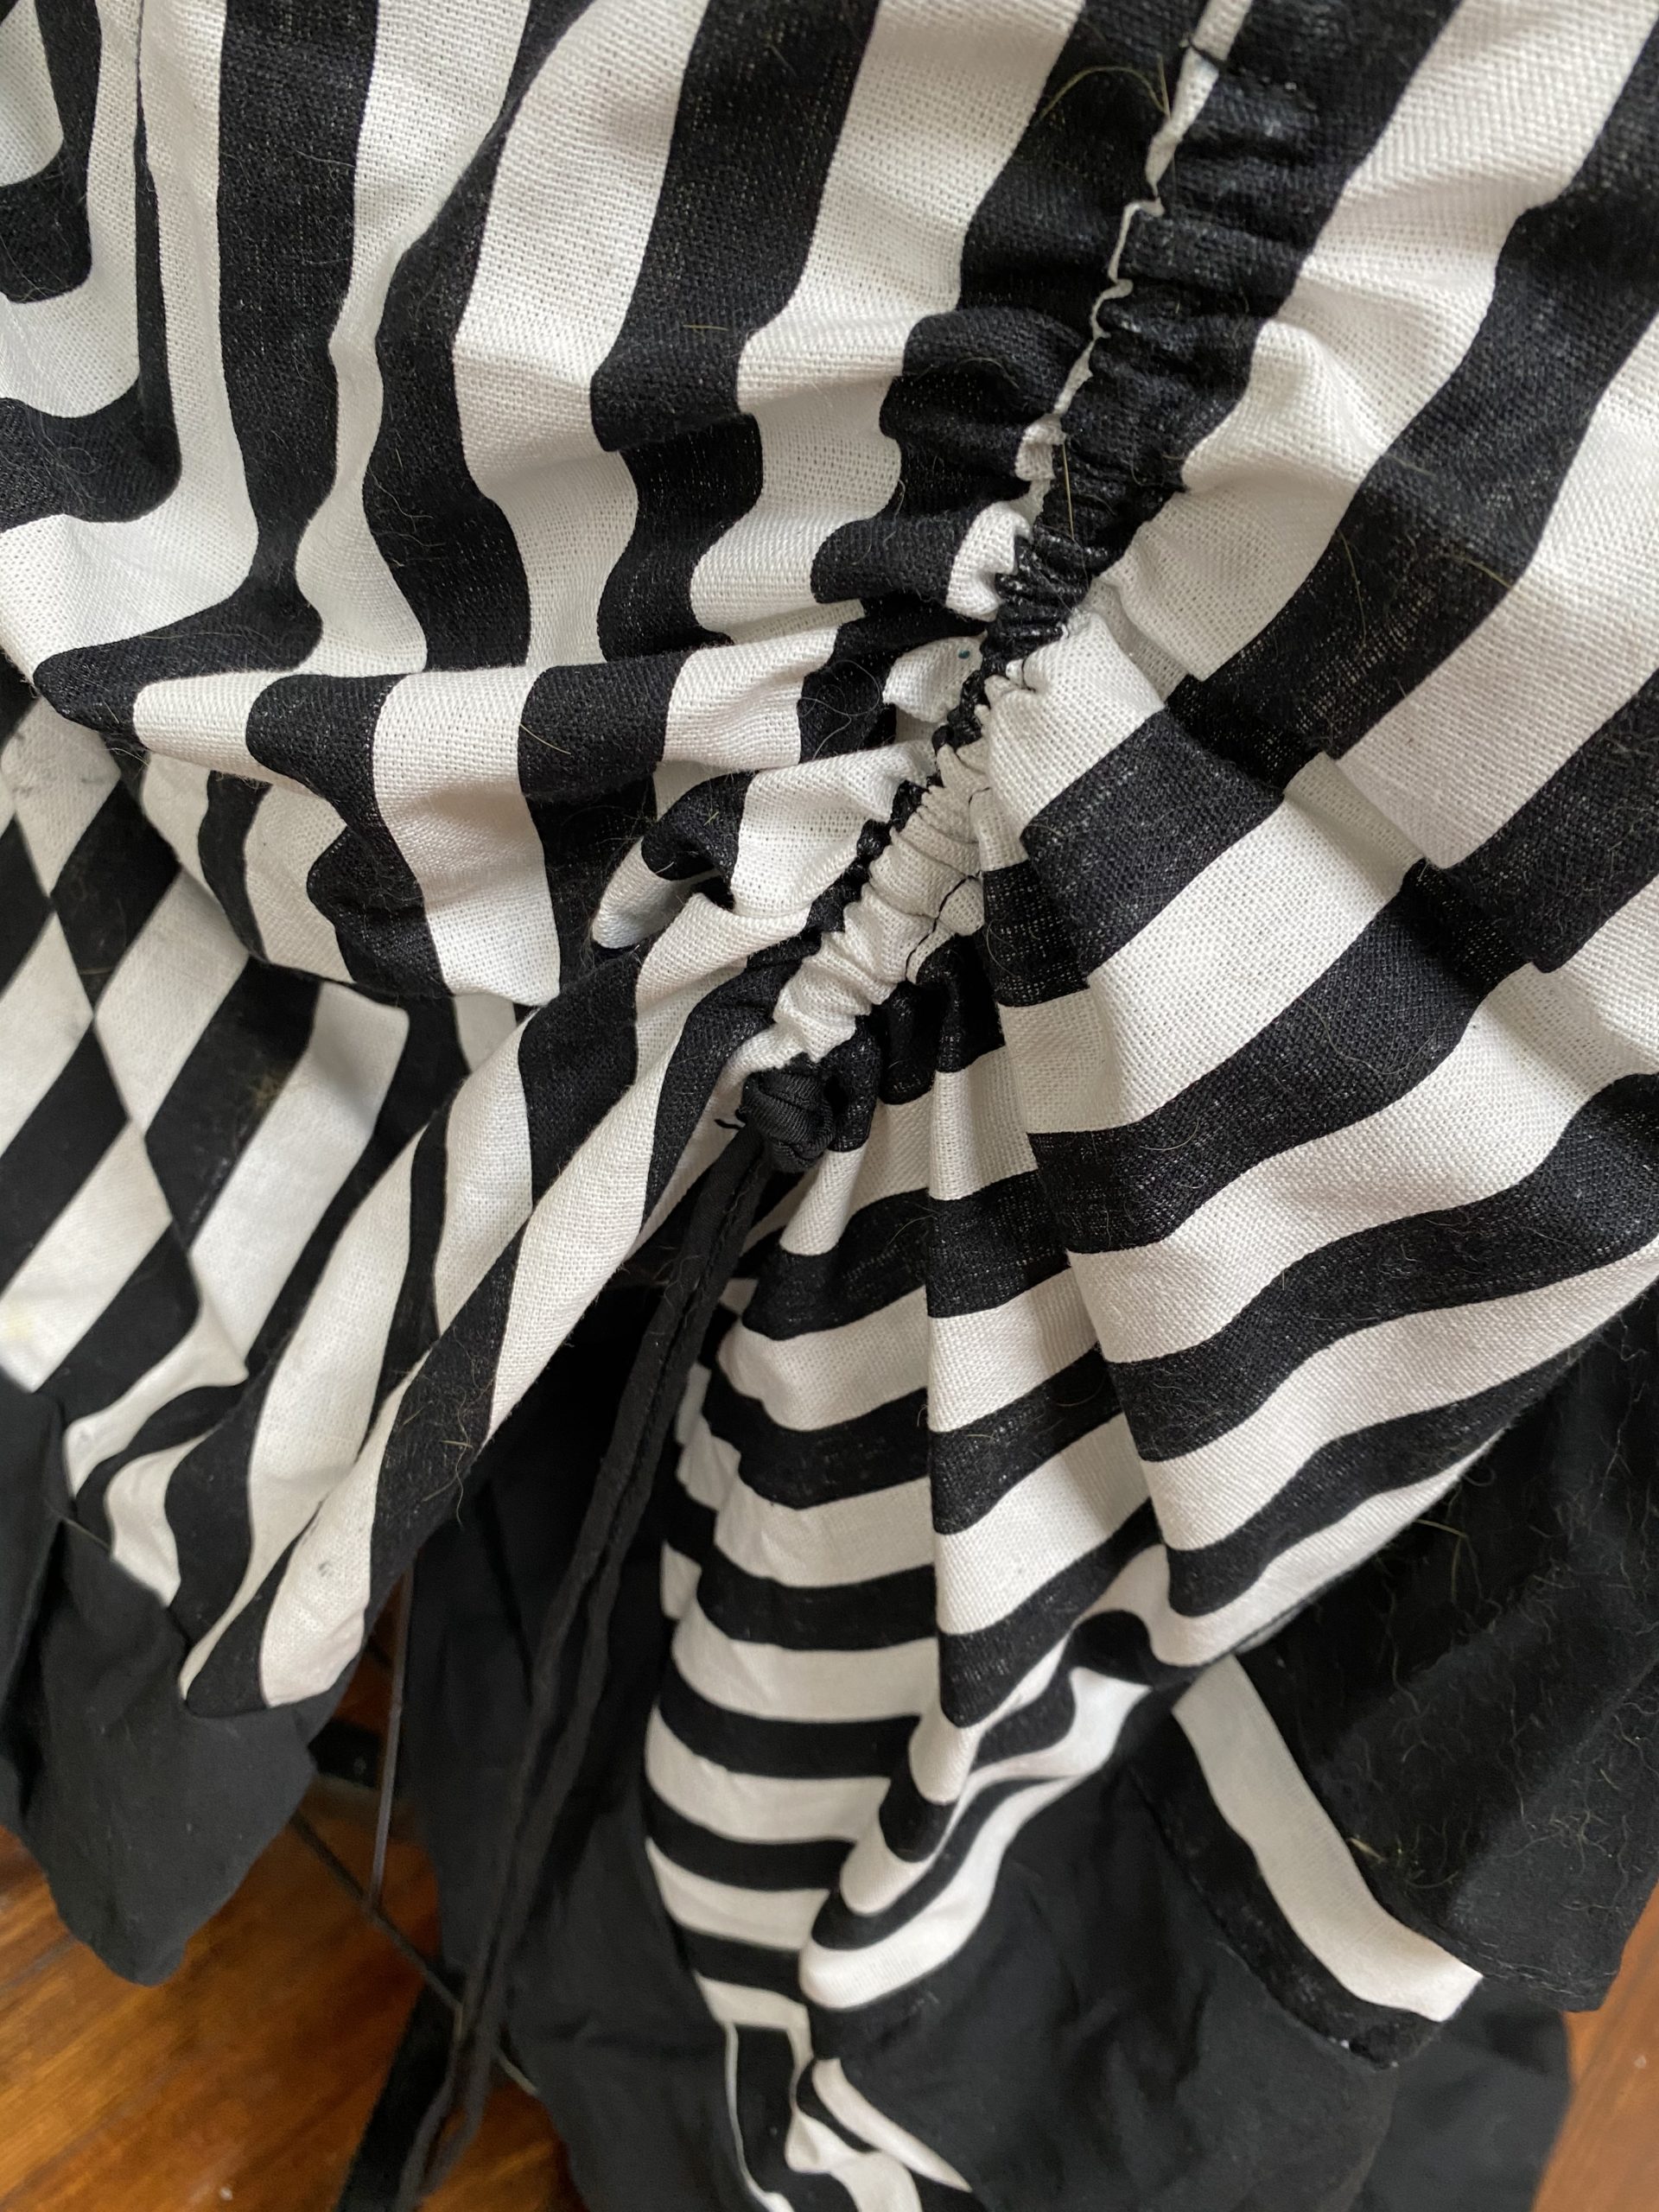 Black and White Striped Victorian skirt